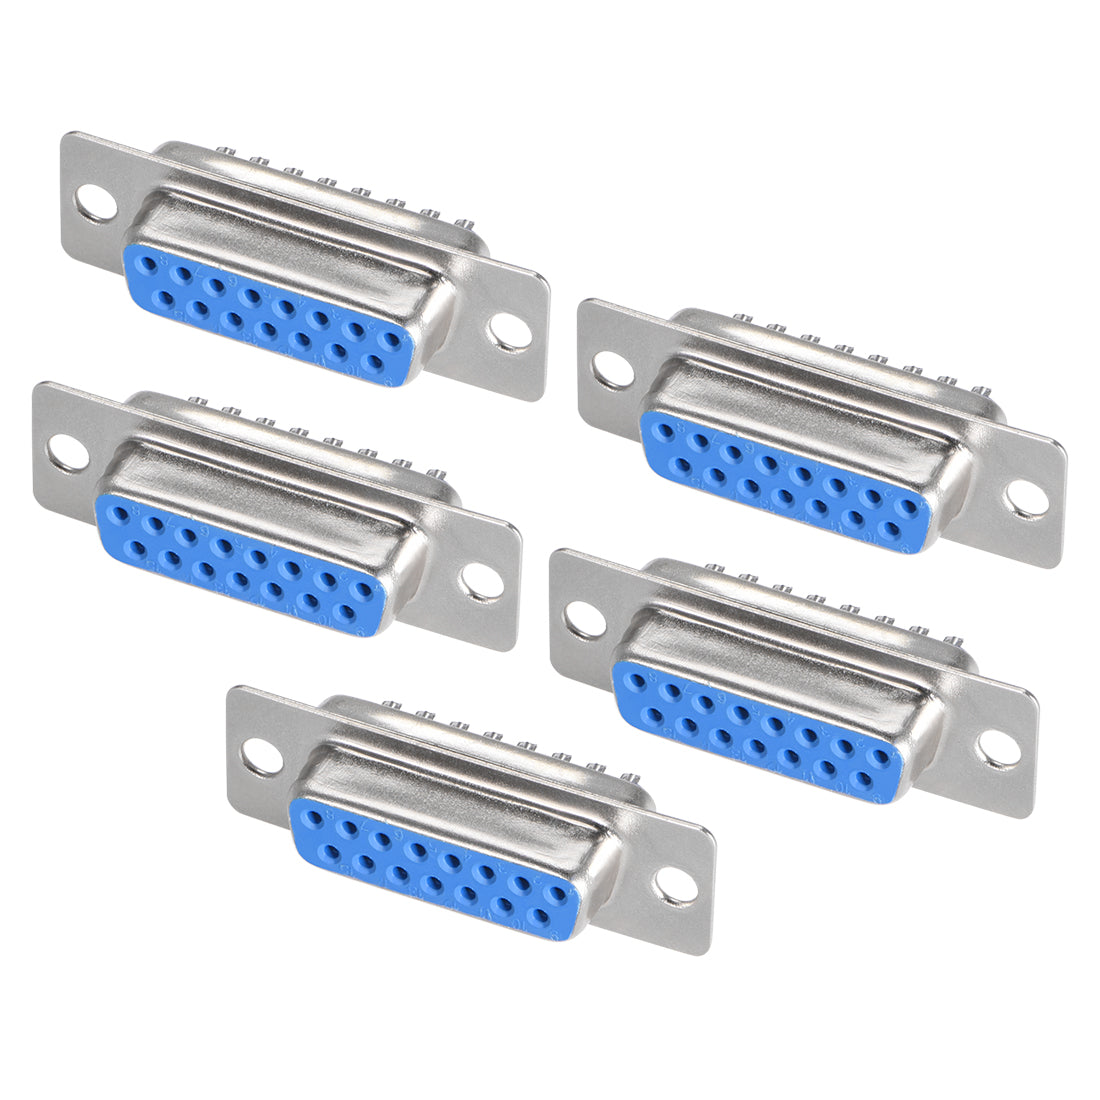 uxcell Uxcell D-sub Connector DB15 Female Socket 15-pin 2-row Port Terminal Breakout for Mechanical Equipment CNC Computers Blue 5pcs